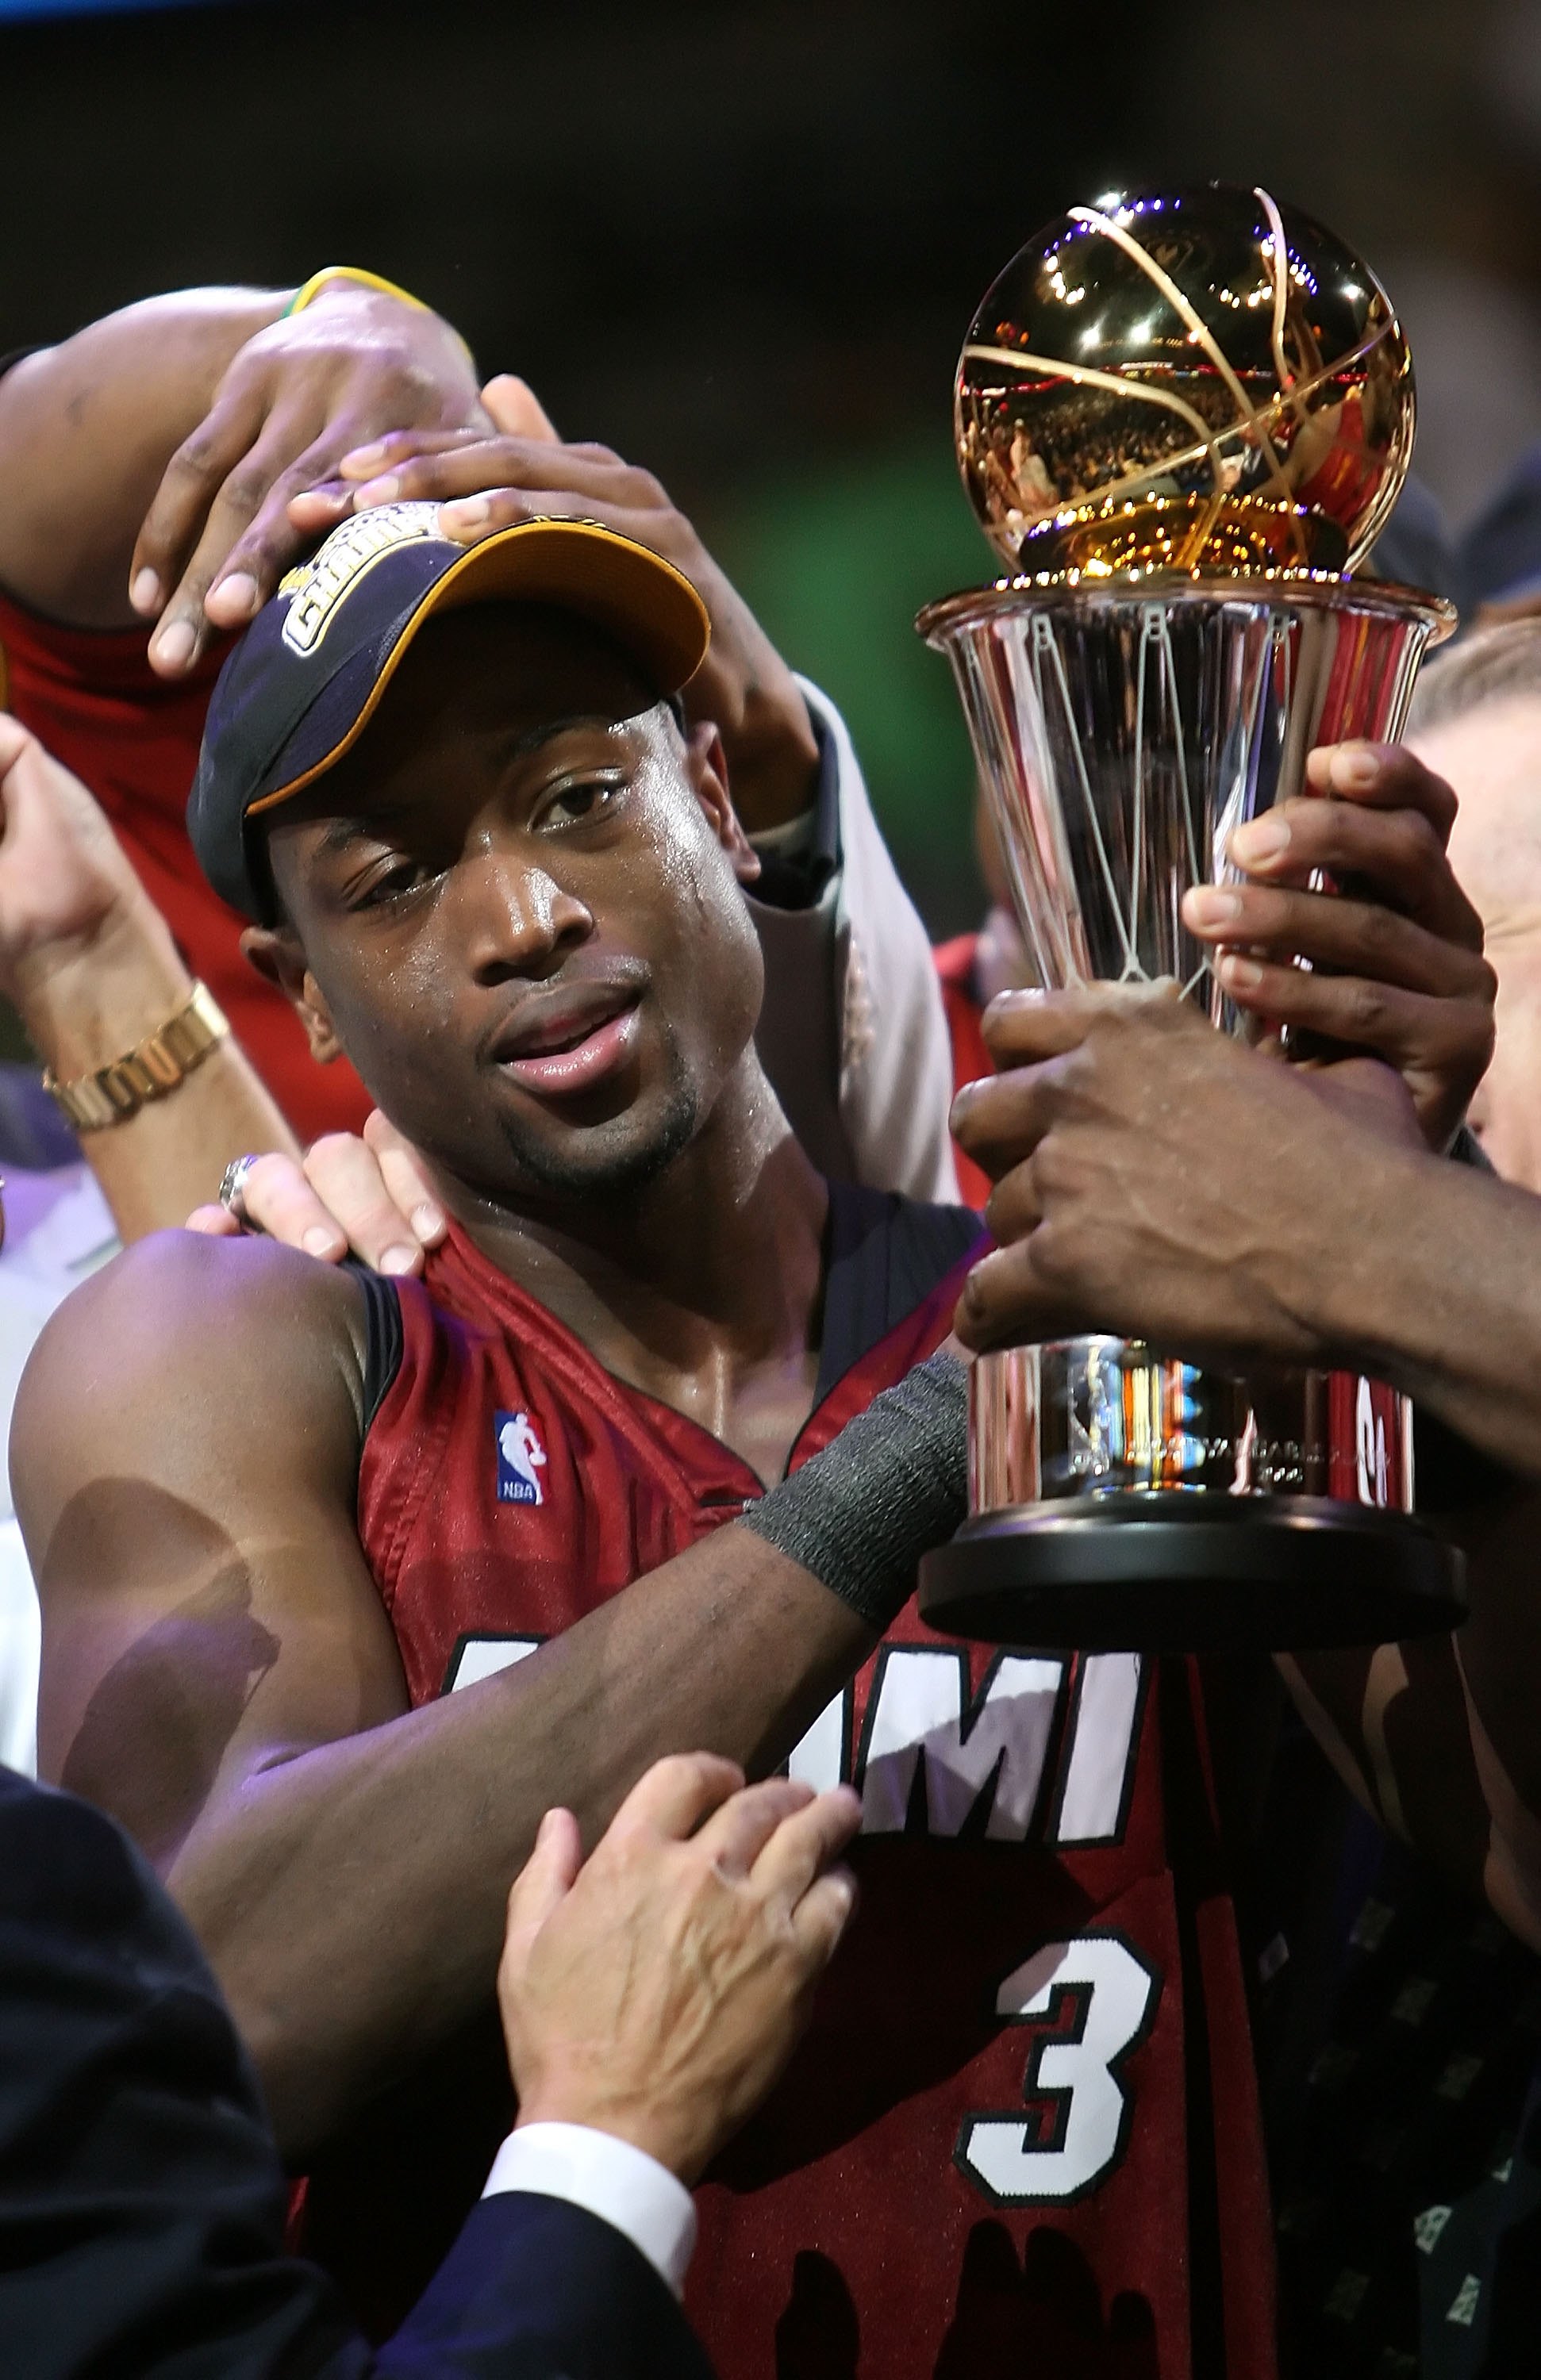 Kobe Bryant vs. Dwyane Wade: A Comparison Between Two Featured